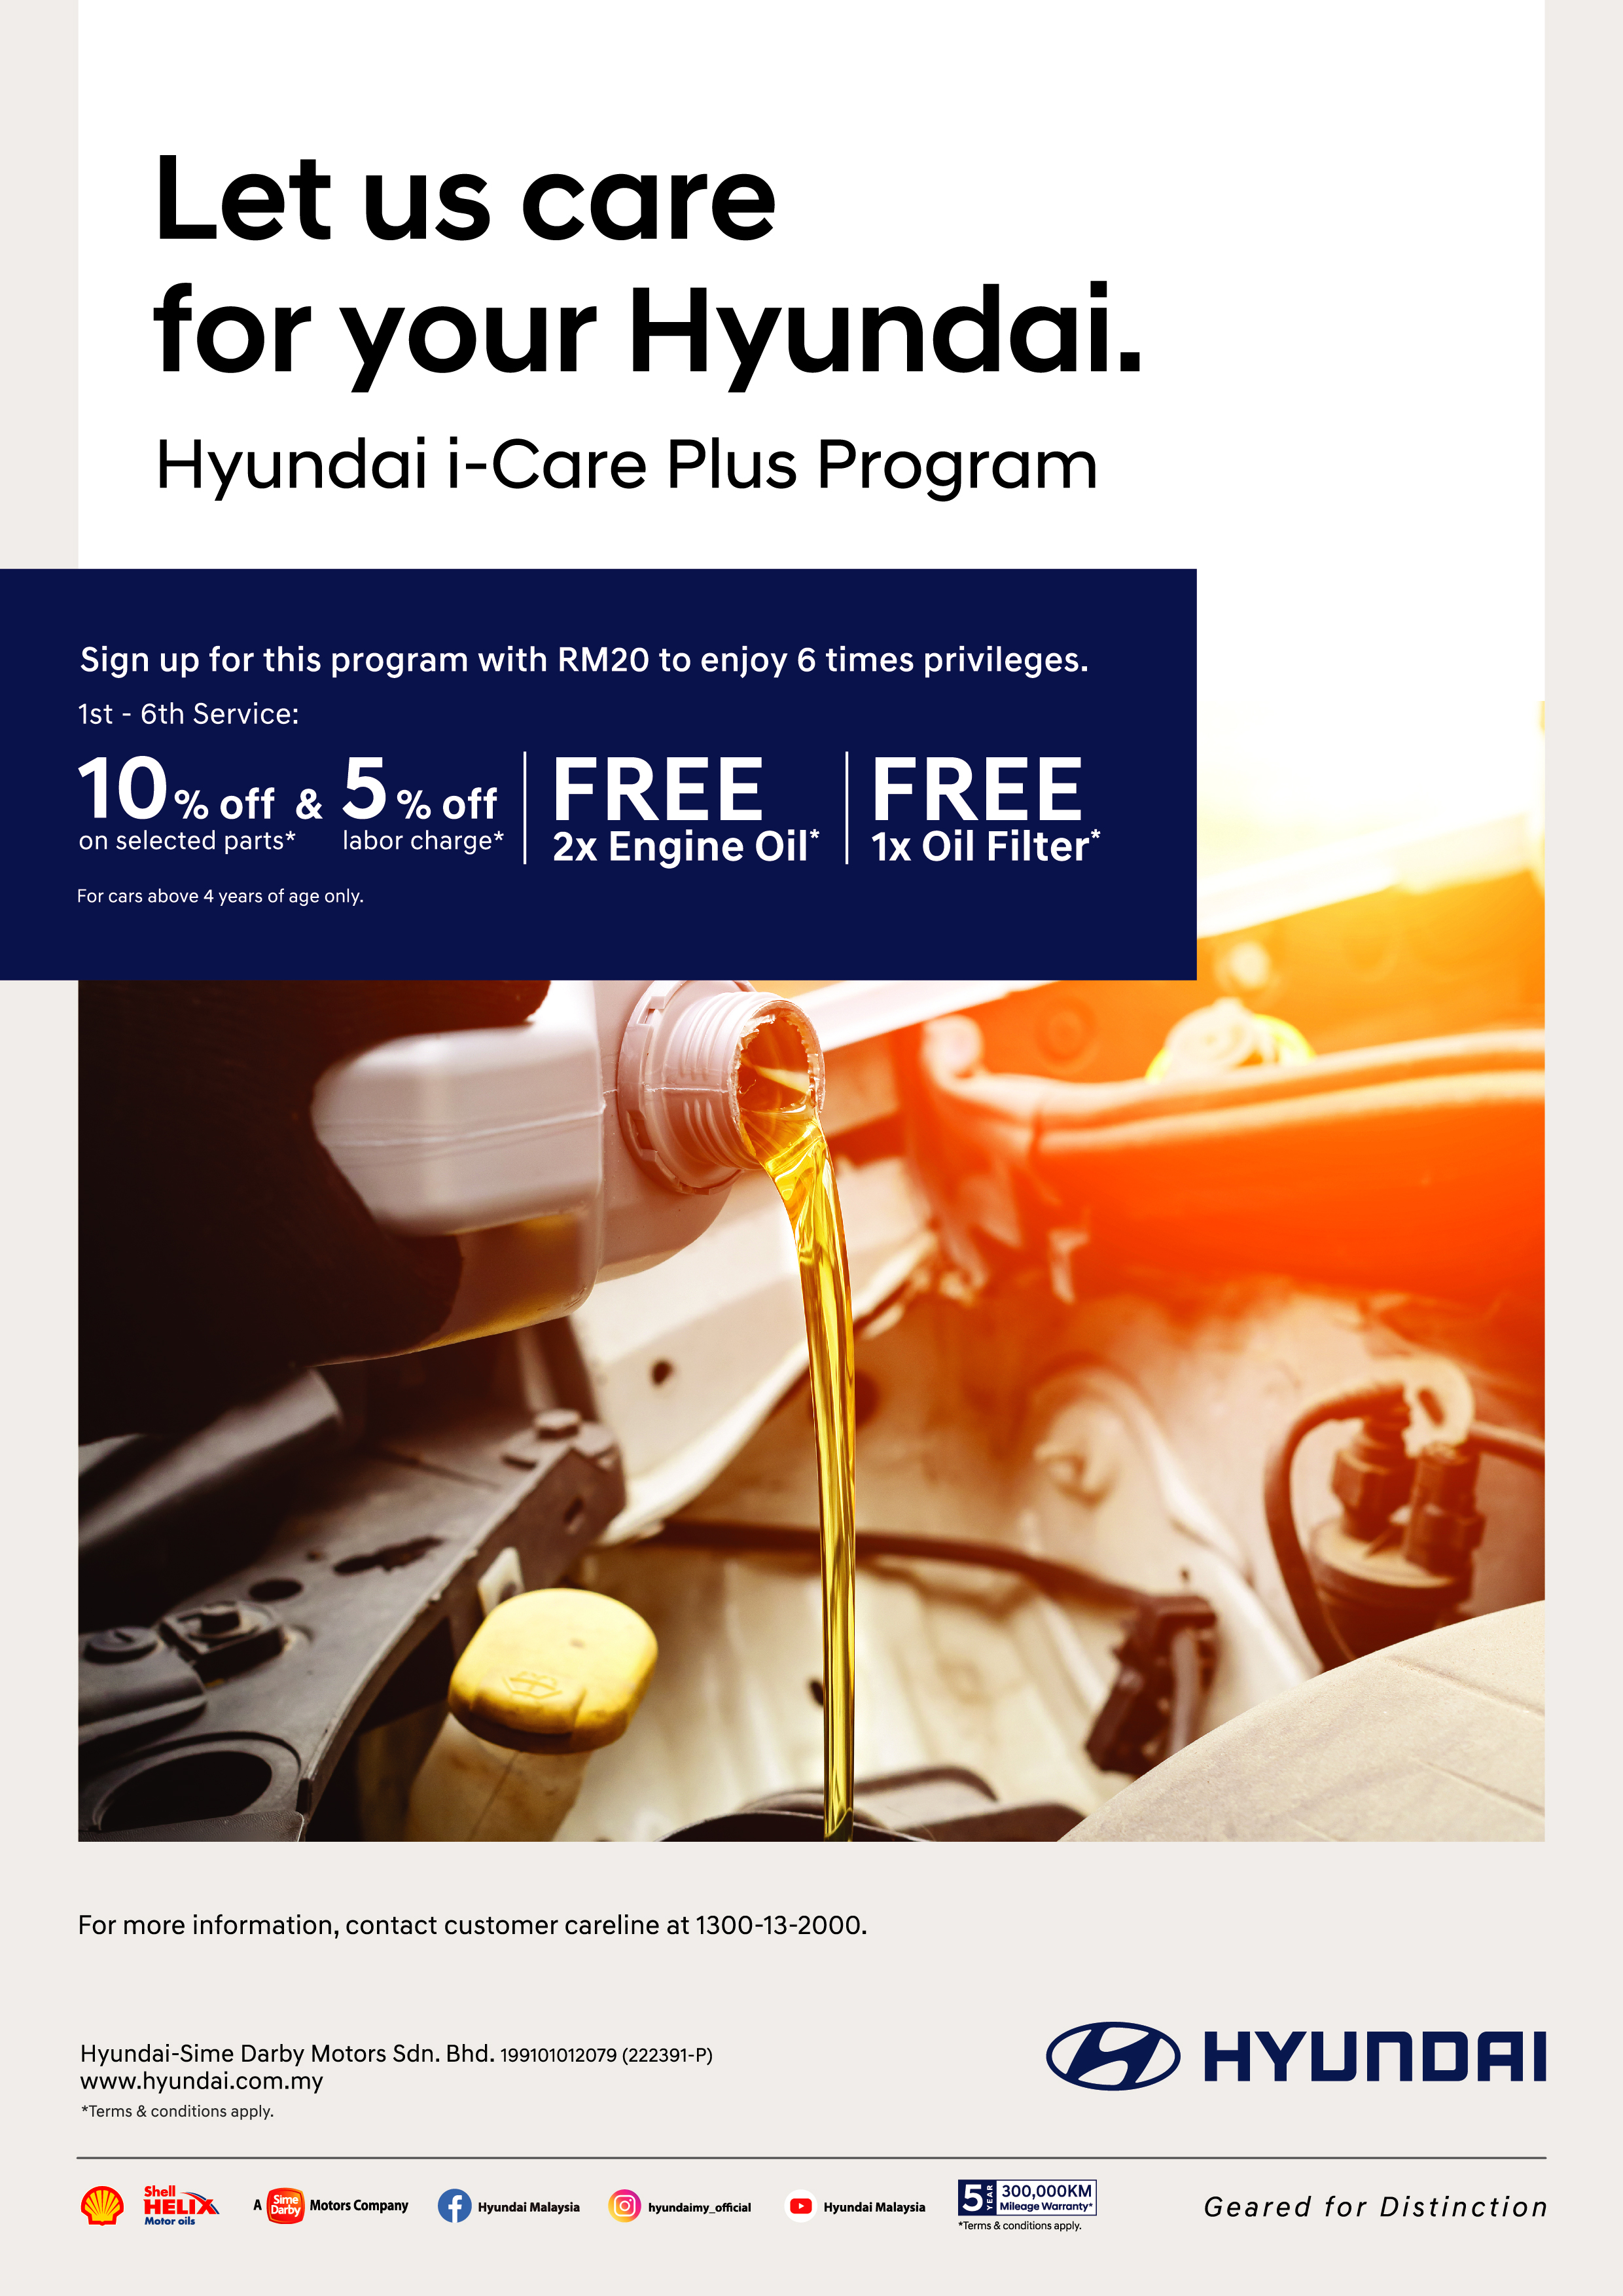 Hyundai i-Care Plus Program | Sign up for this program with RM20 to enjoy 6 times privileges. 1st - 6th Service : 10% off on selected parts* and 5% off labor charge*. | Free 2x Engine Oil* | Free 1x Oil Filter* | Terms & Conditions apply.